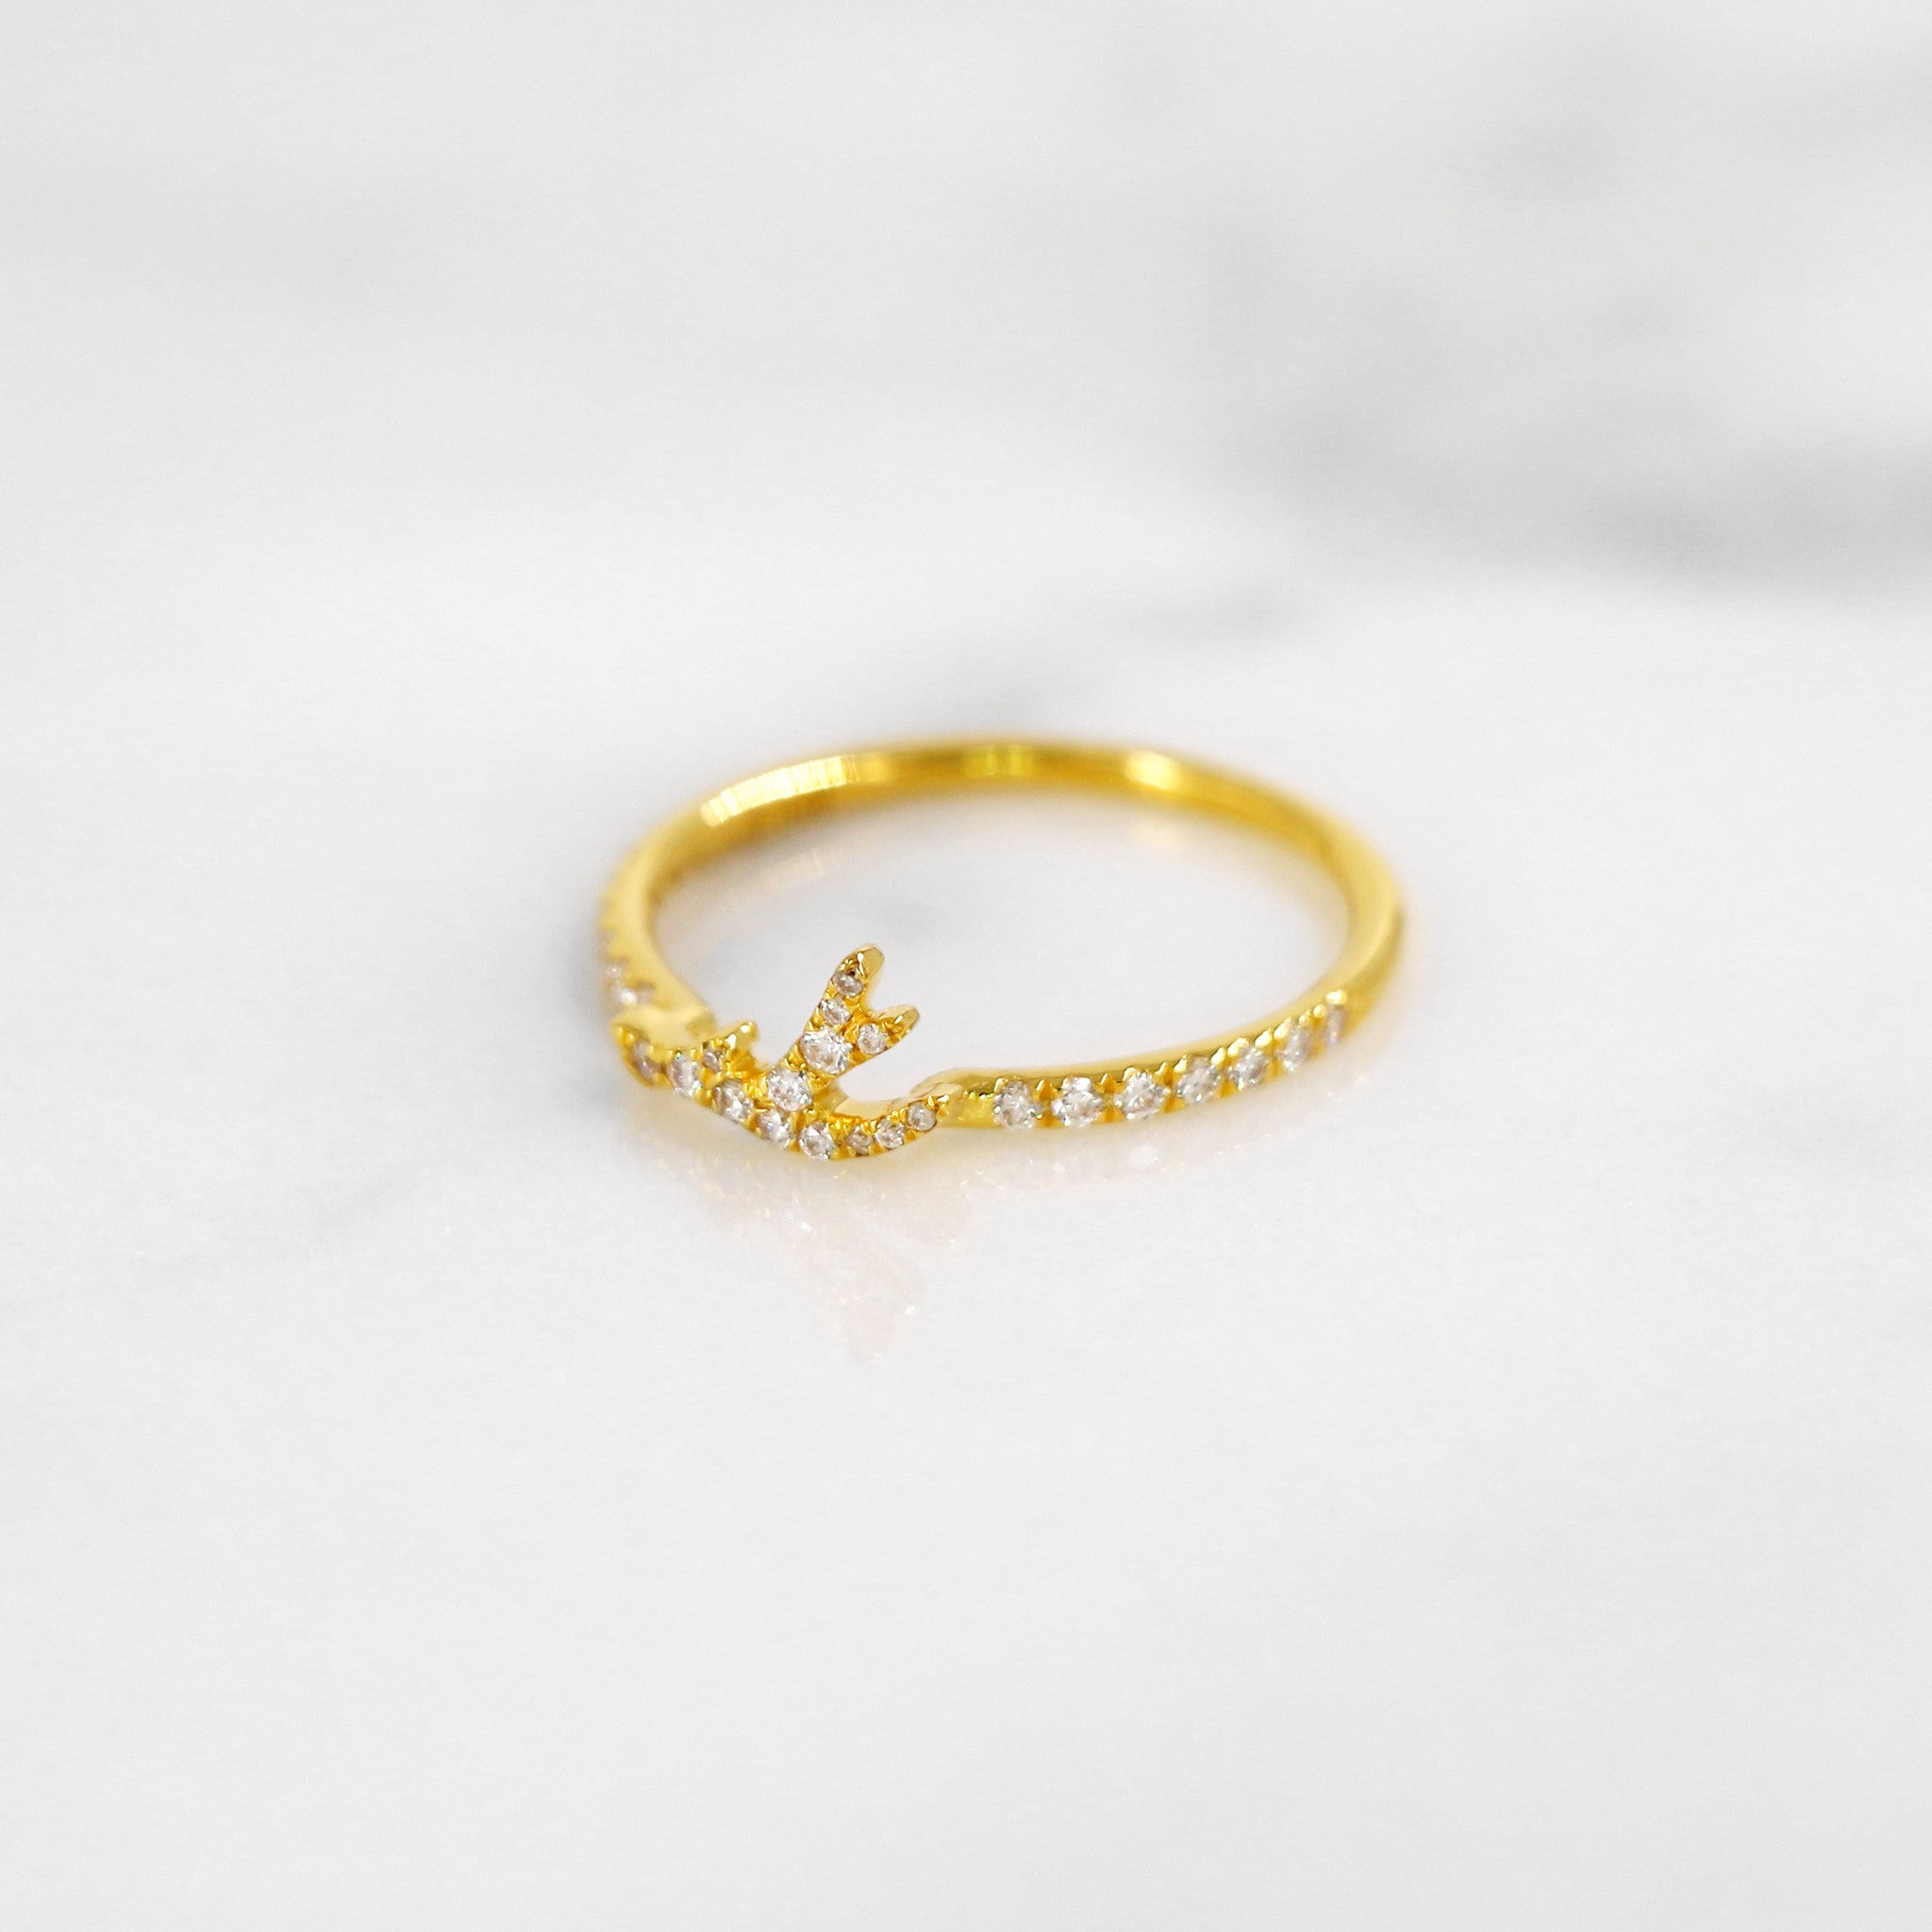 Delicate diamond antler ring in yellow gold.